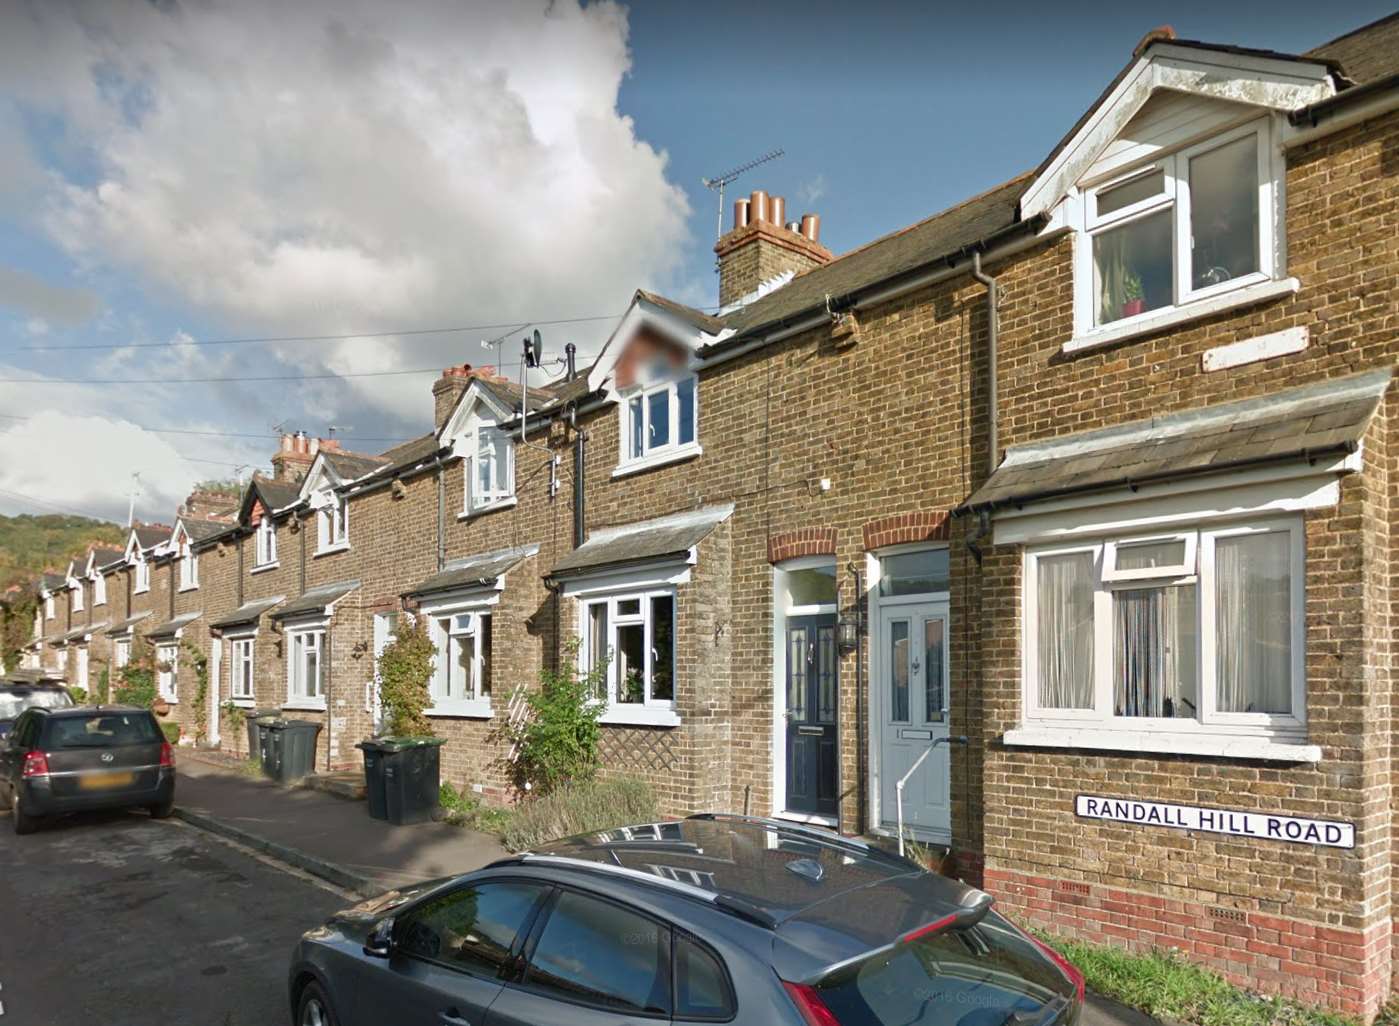 The arrest was after a break-in in Randall Hill Road. Picture: Google Streetview